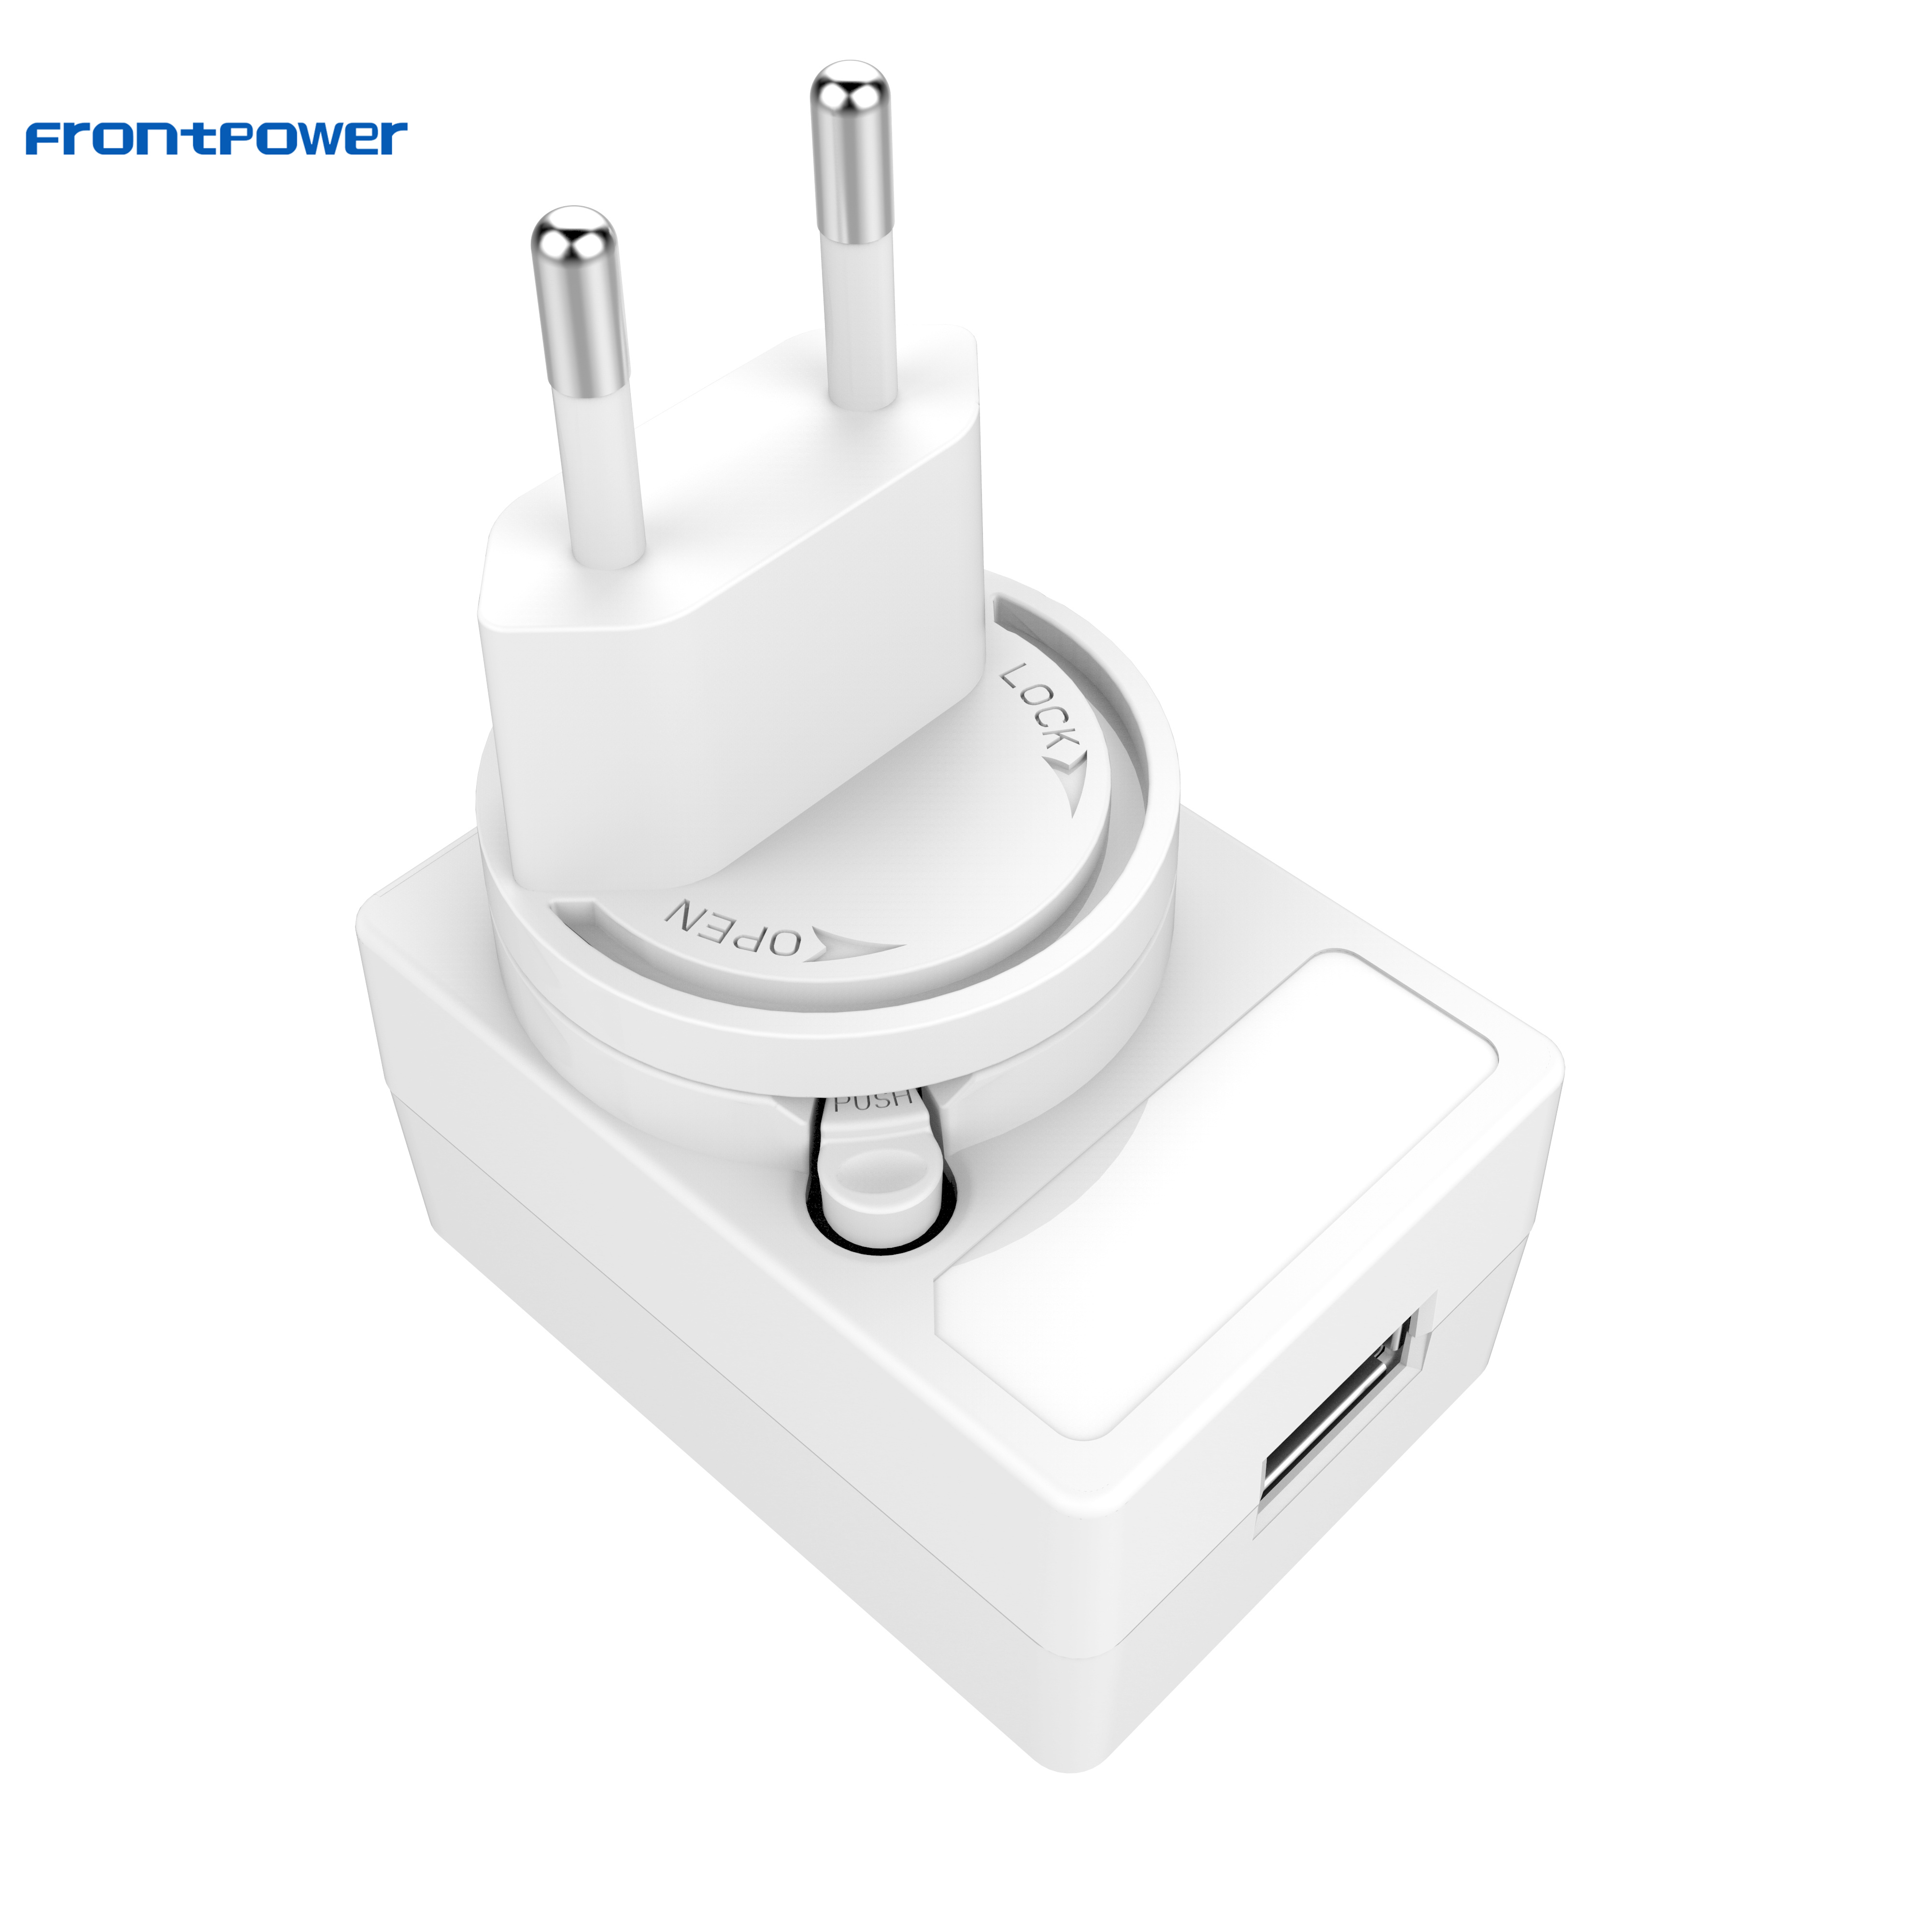 Frontpower UK US EU AU interchangeable plugs USB wall charger 5V 2.5A with UL CB CE SAA KC FCC PSE